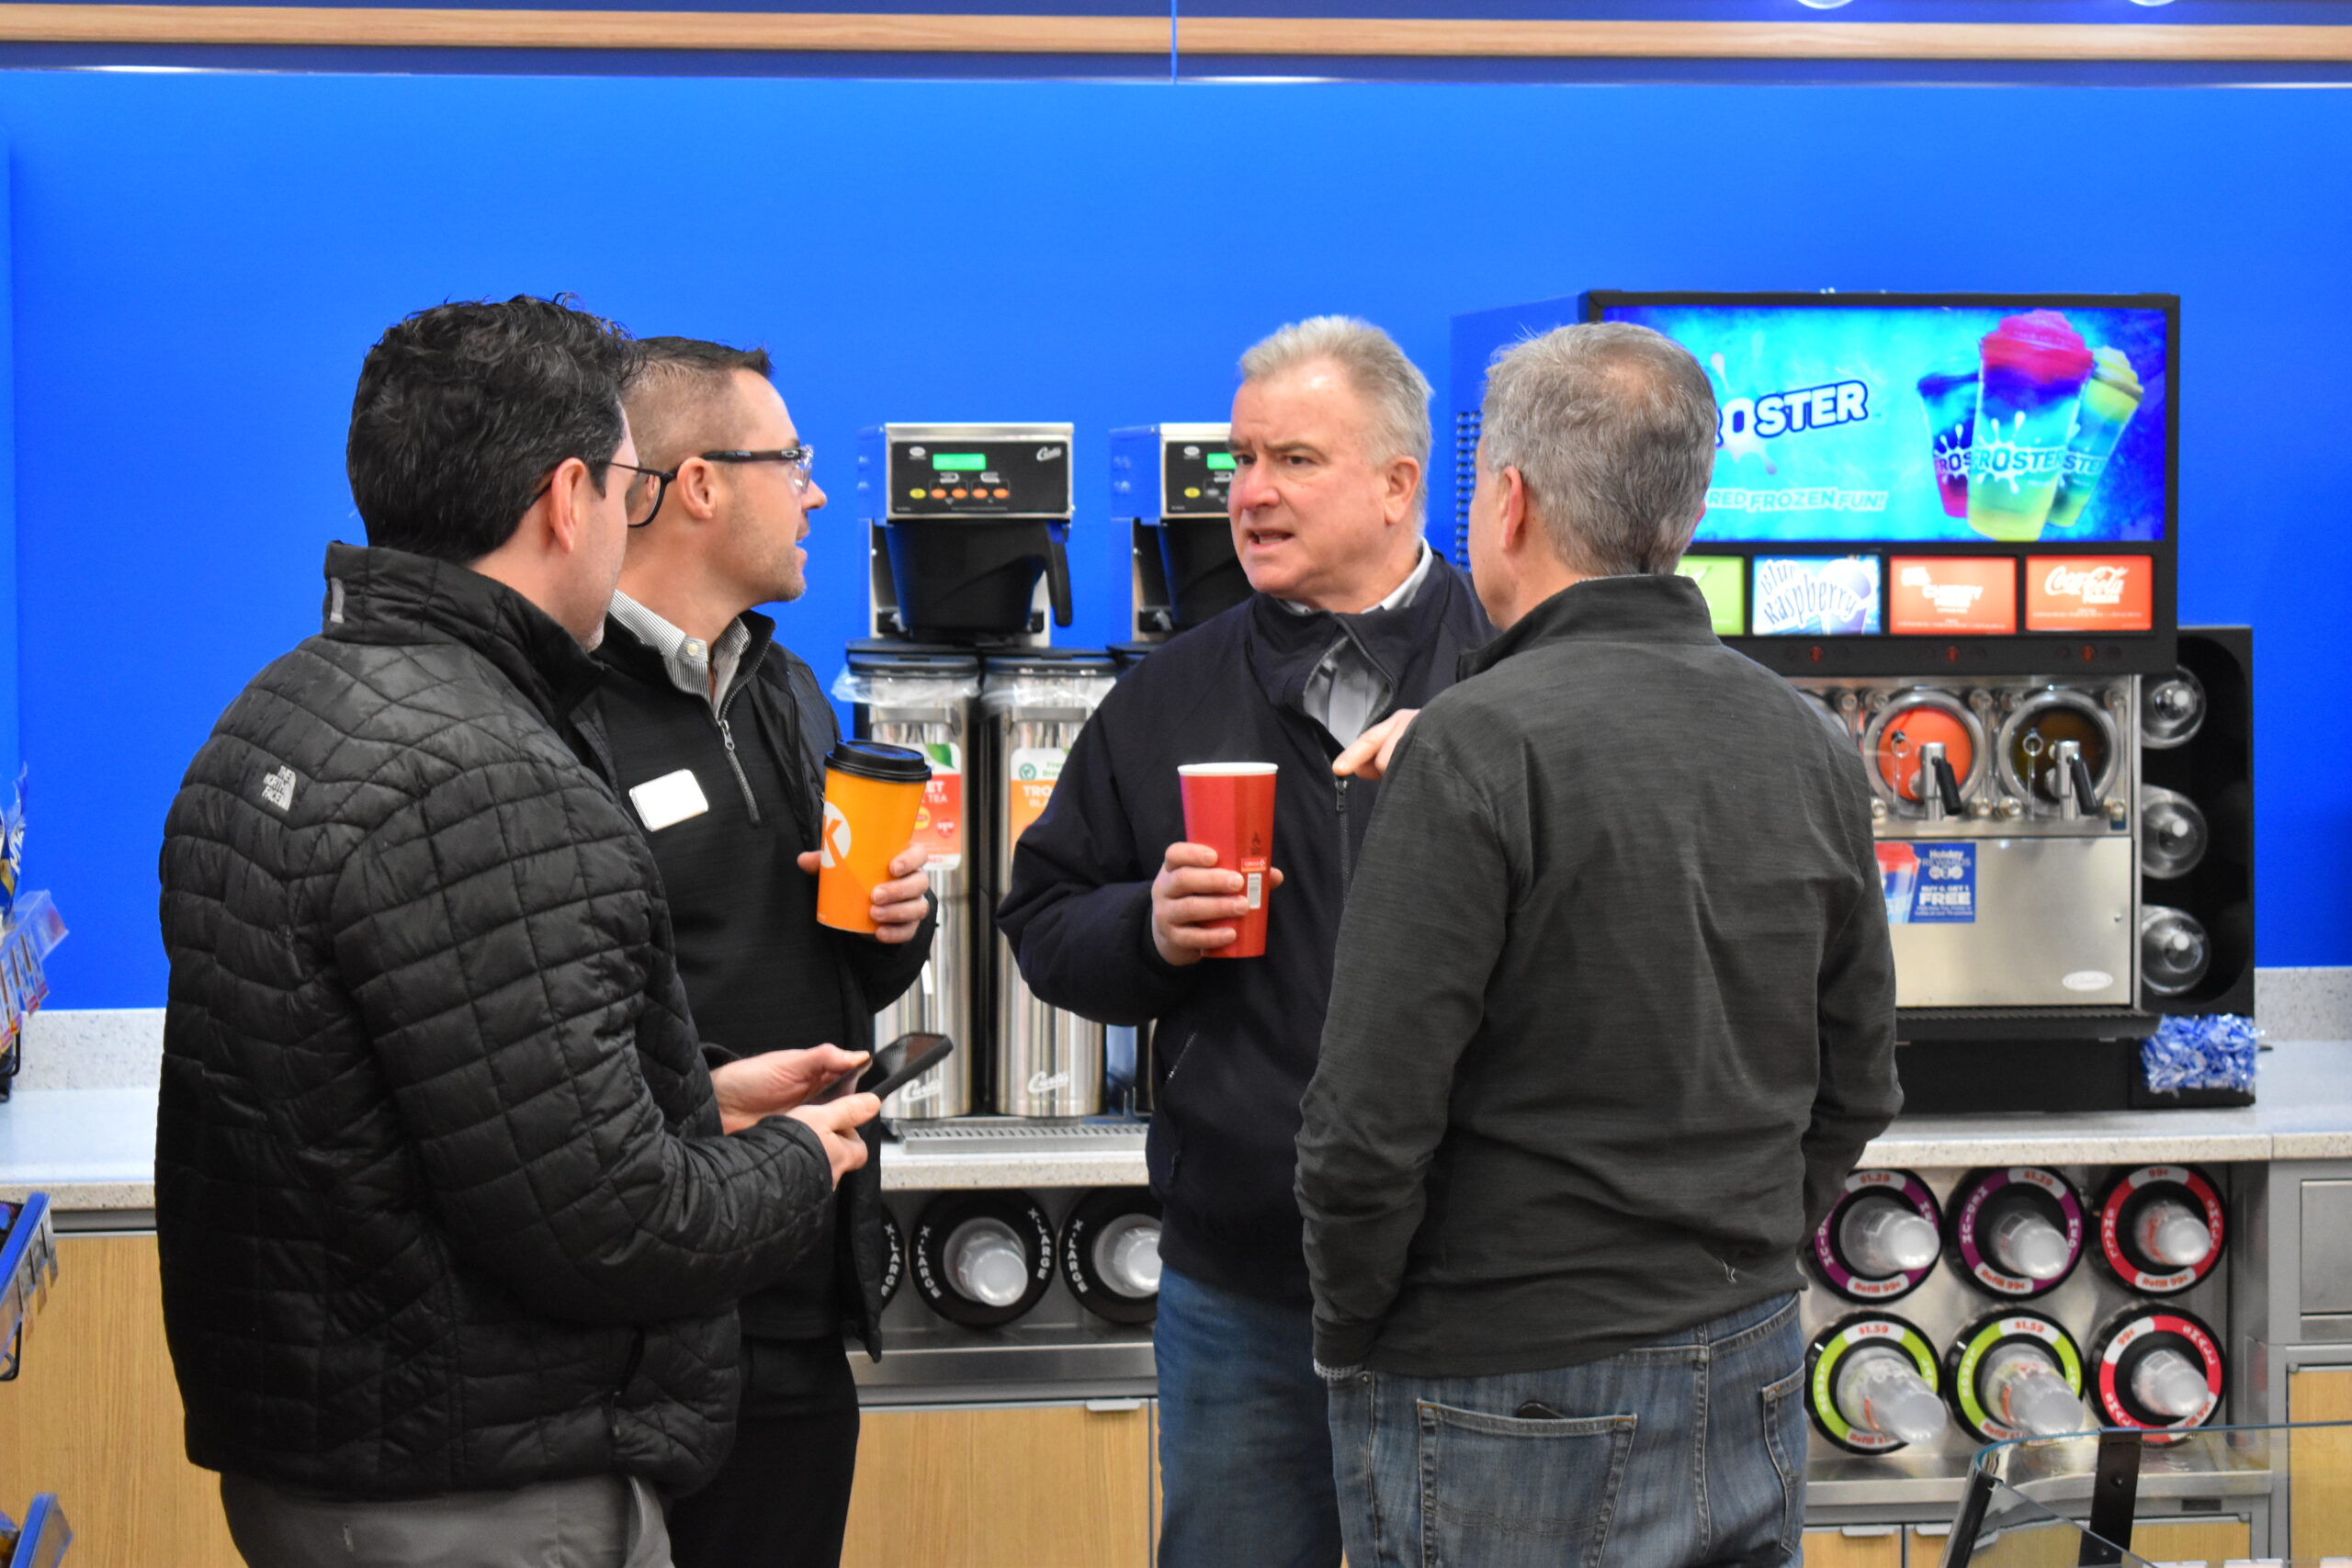 People mingle and talk during a grand opening event for a Circle K store in Green Bay